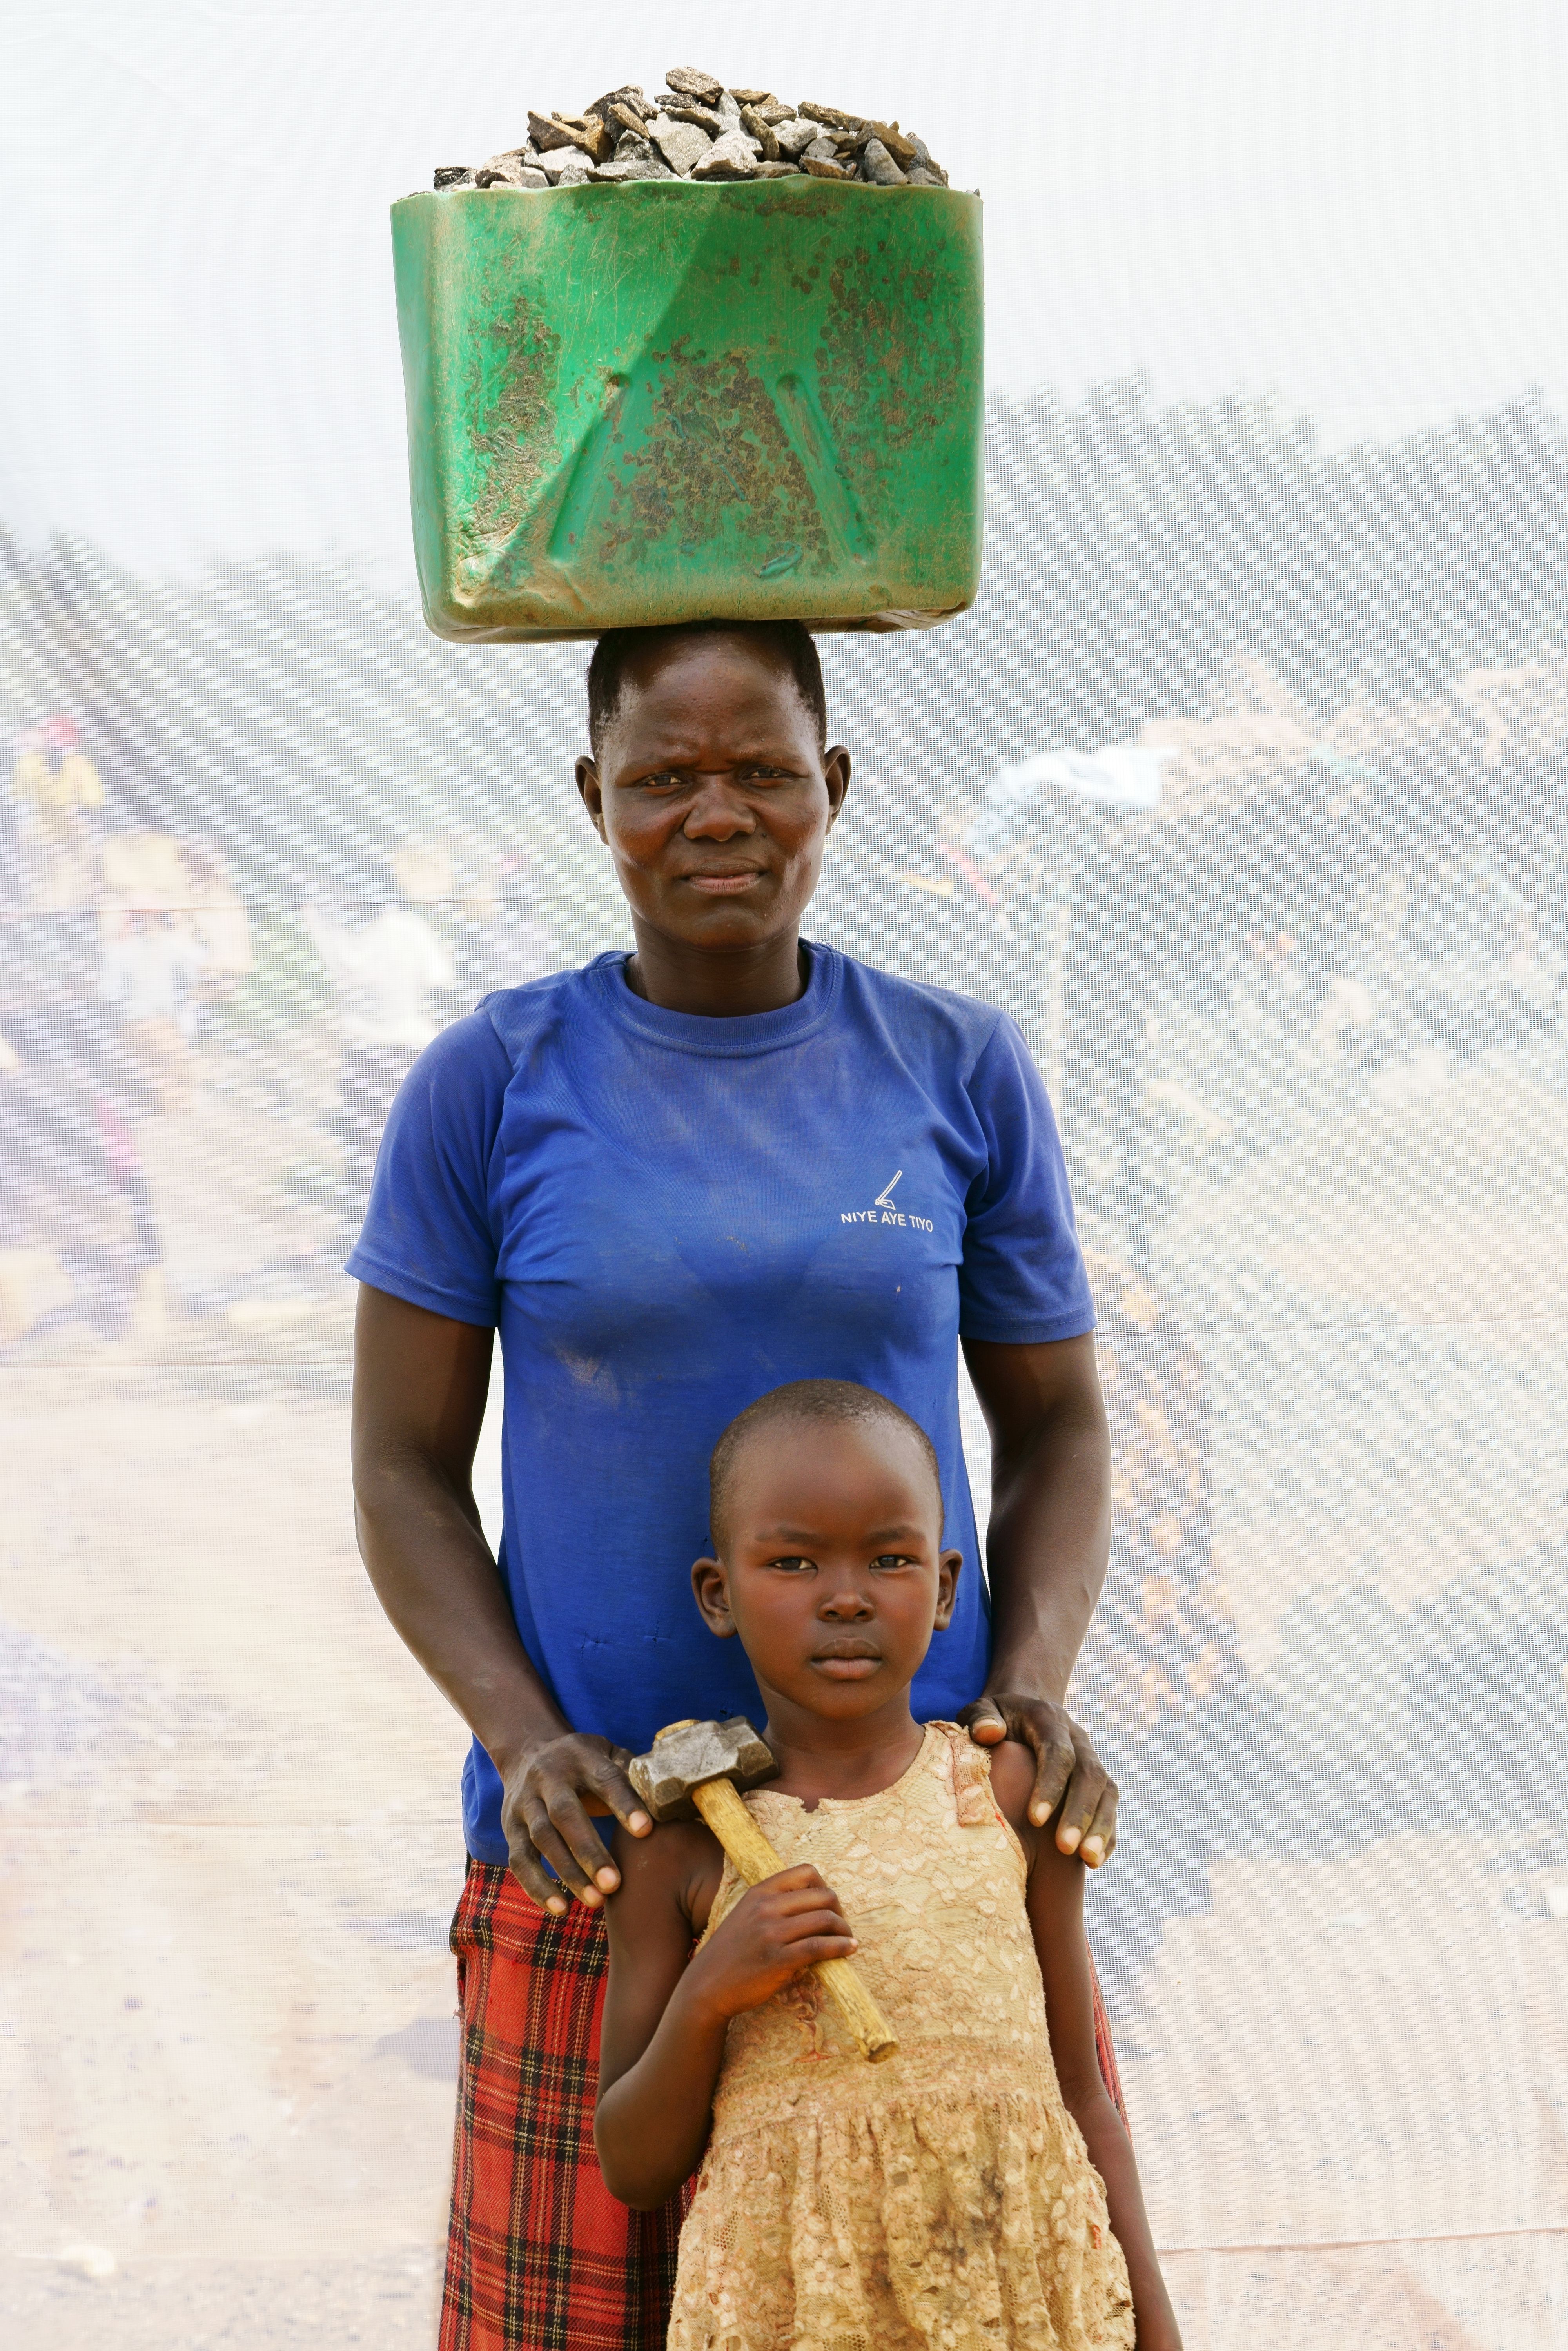 ACAN CATHERINE: AGE 27 & HER DAUGHTER PATIENCE: AGE 4. WORKING IN QUARRY FOR 10 YEARS. PATIENCE HELPS HOWEVER SHE CAN